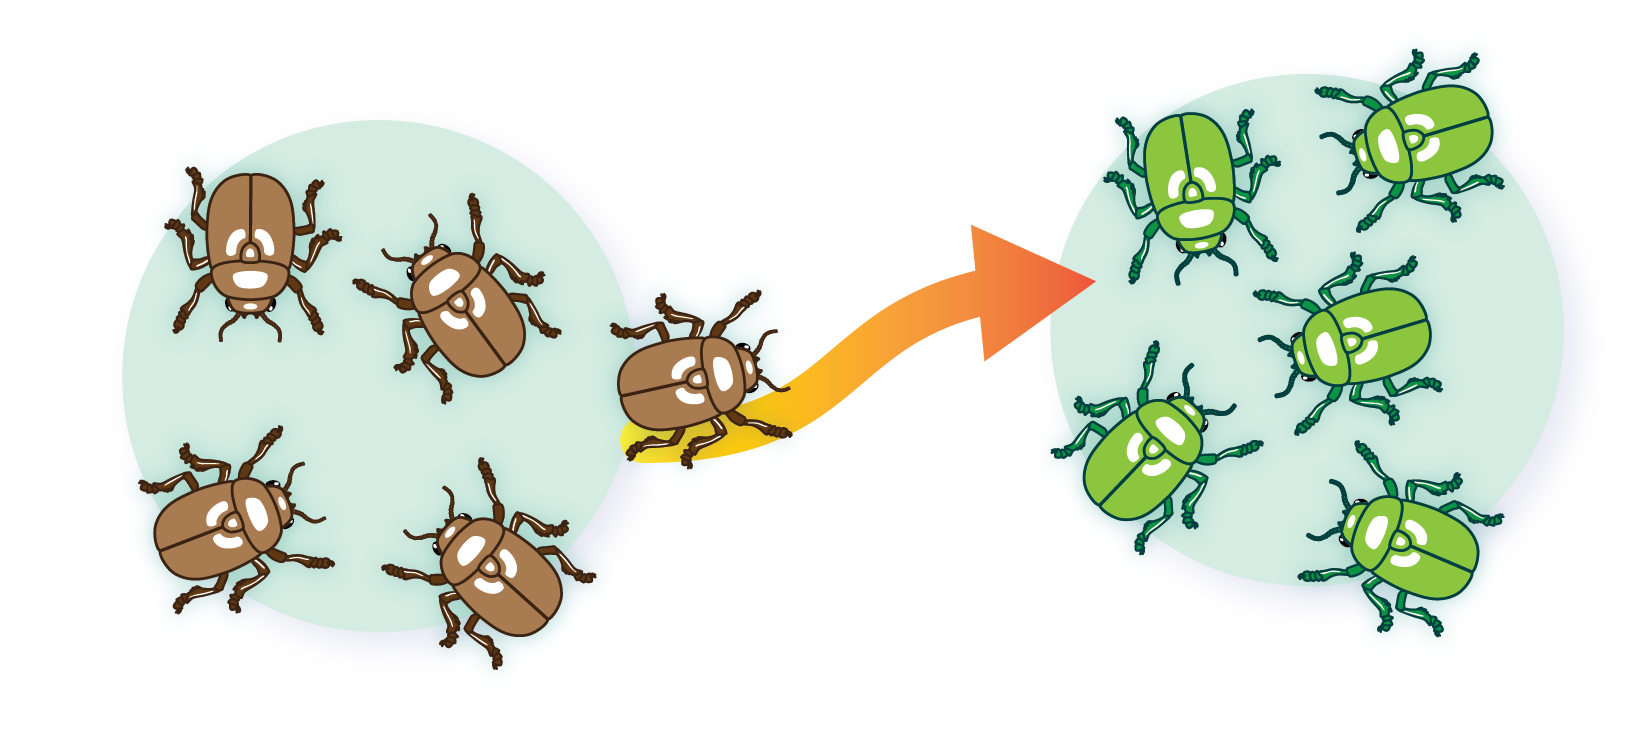 Two distinct populations of beetles separated by an arrow pointing to the right. Brown beetles are to the left, green beetles are to the right. One of the five brown beetles is moving over the arrow to the population of five green beetles.